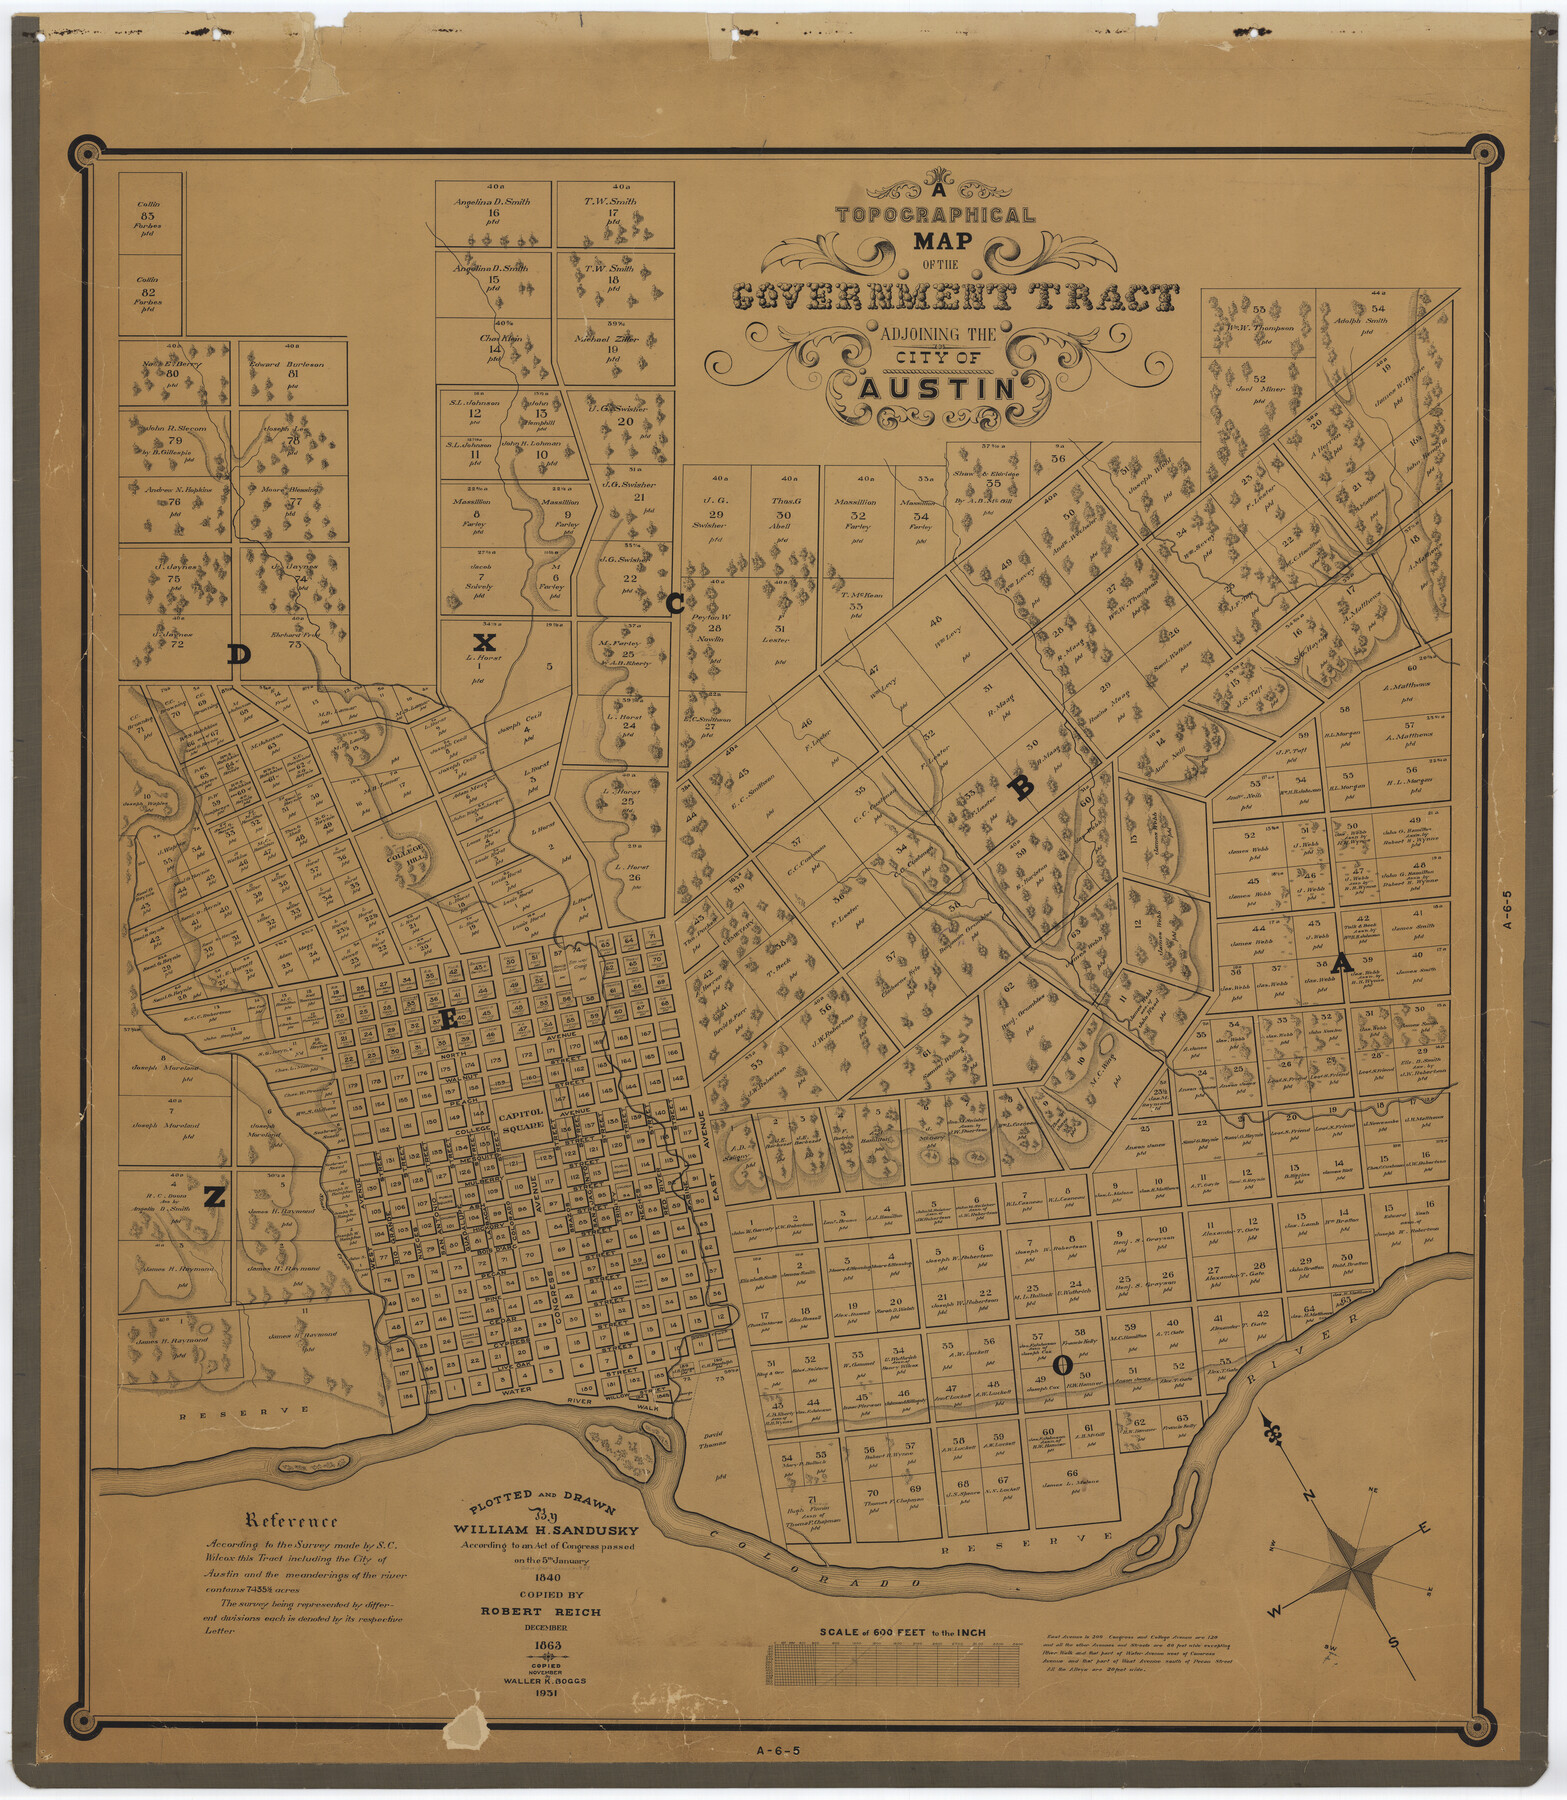 2178, A Topographical Map of the Government Tract Adjoining the City of Austin, General Map Collection